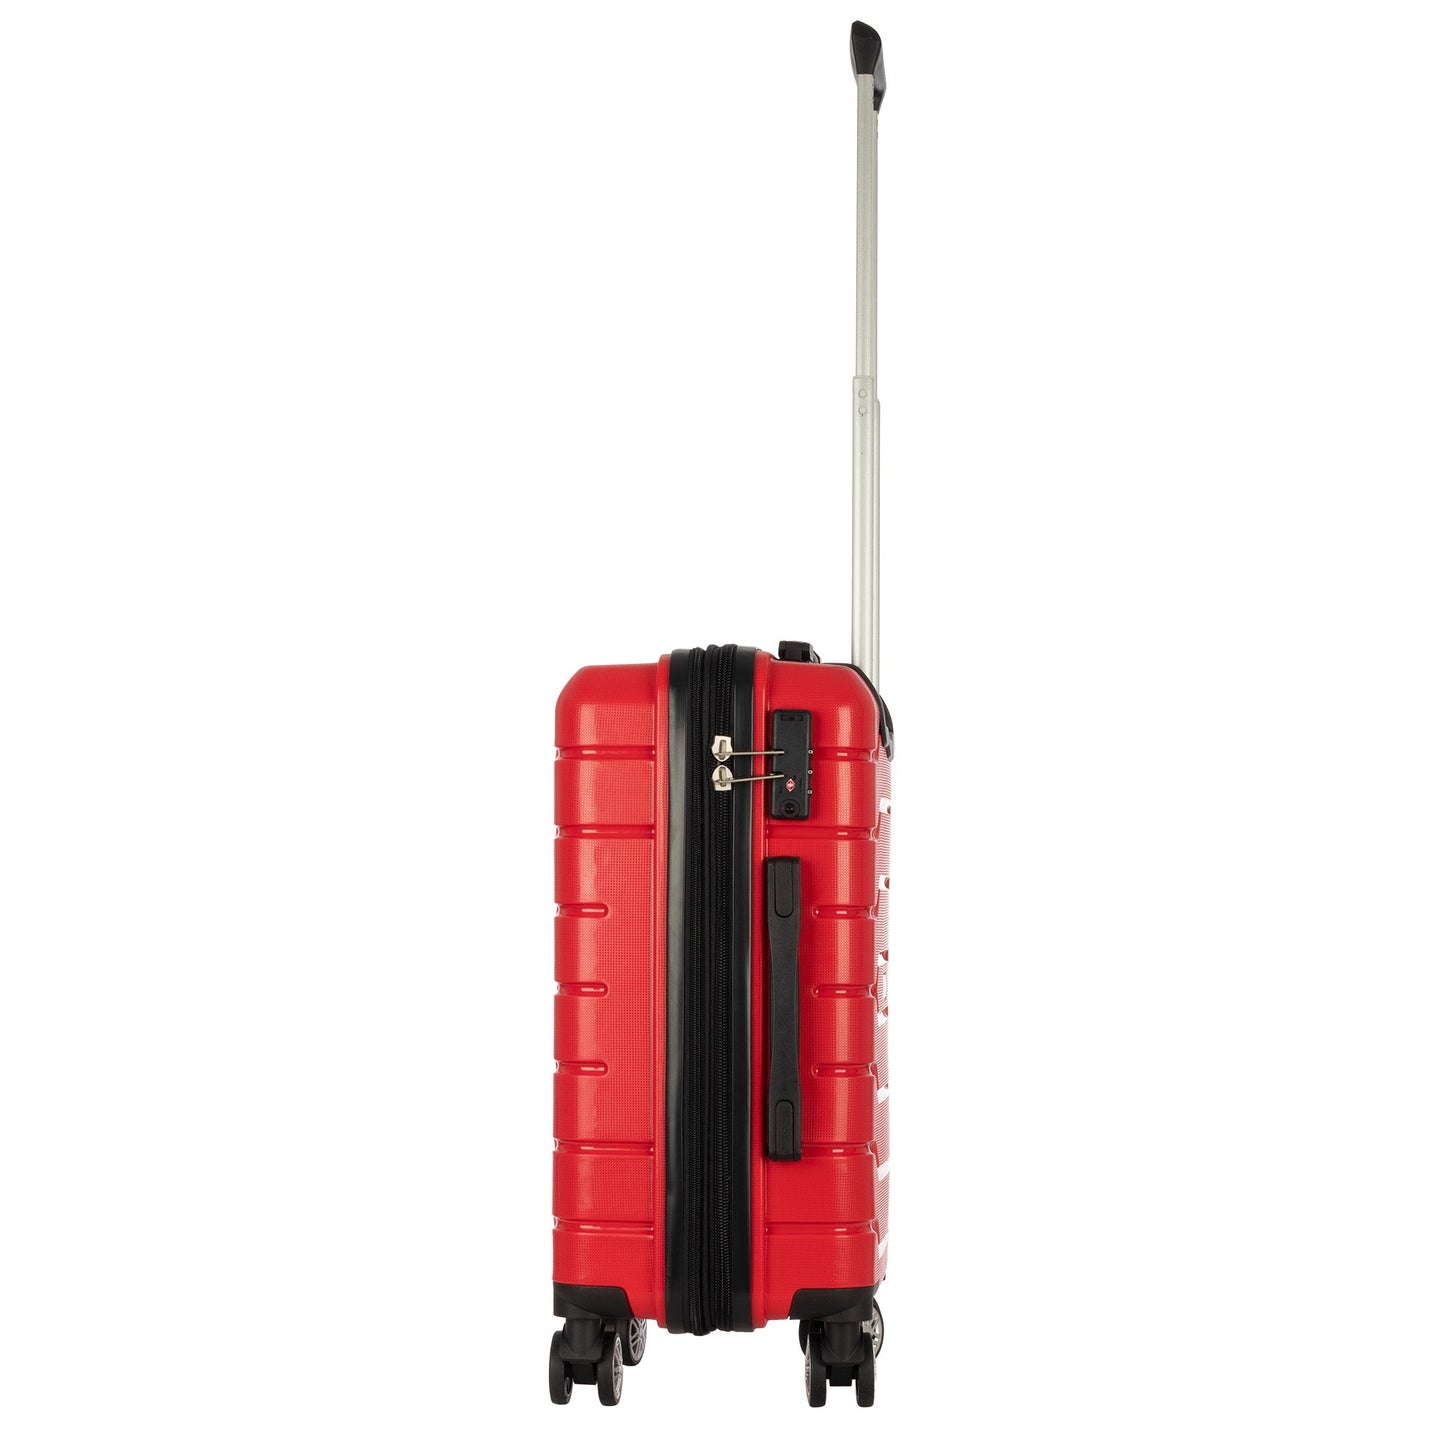 Ian Collection Red Luggage (20") Suitcase Lock Spinner Hardshell